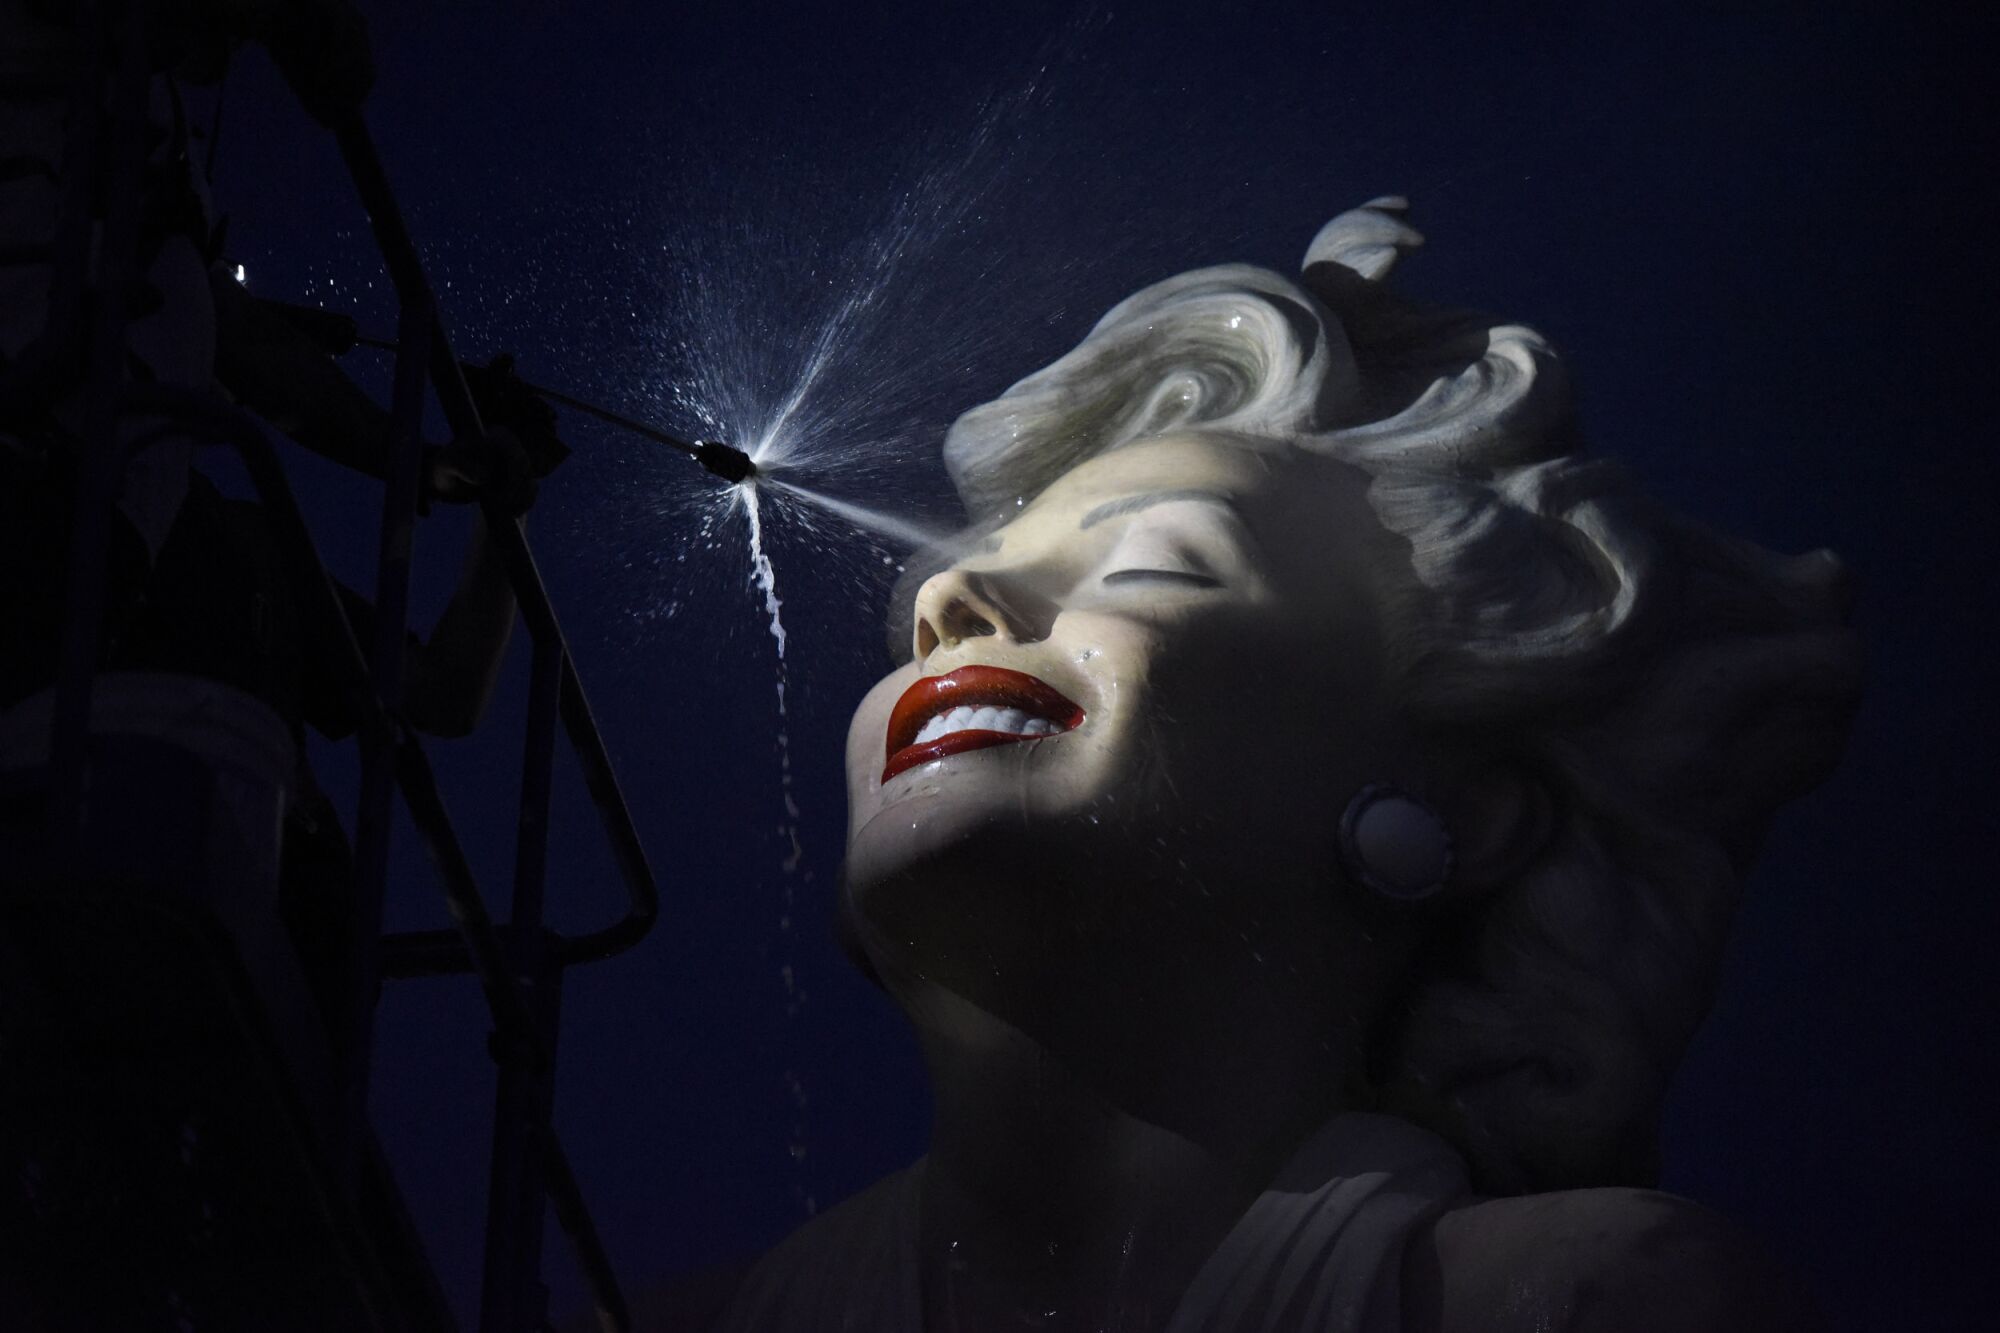 The sculpture "Forever Marilyn" is sprayed at night during the sculpture's installation. 